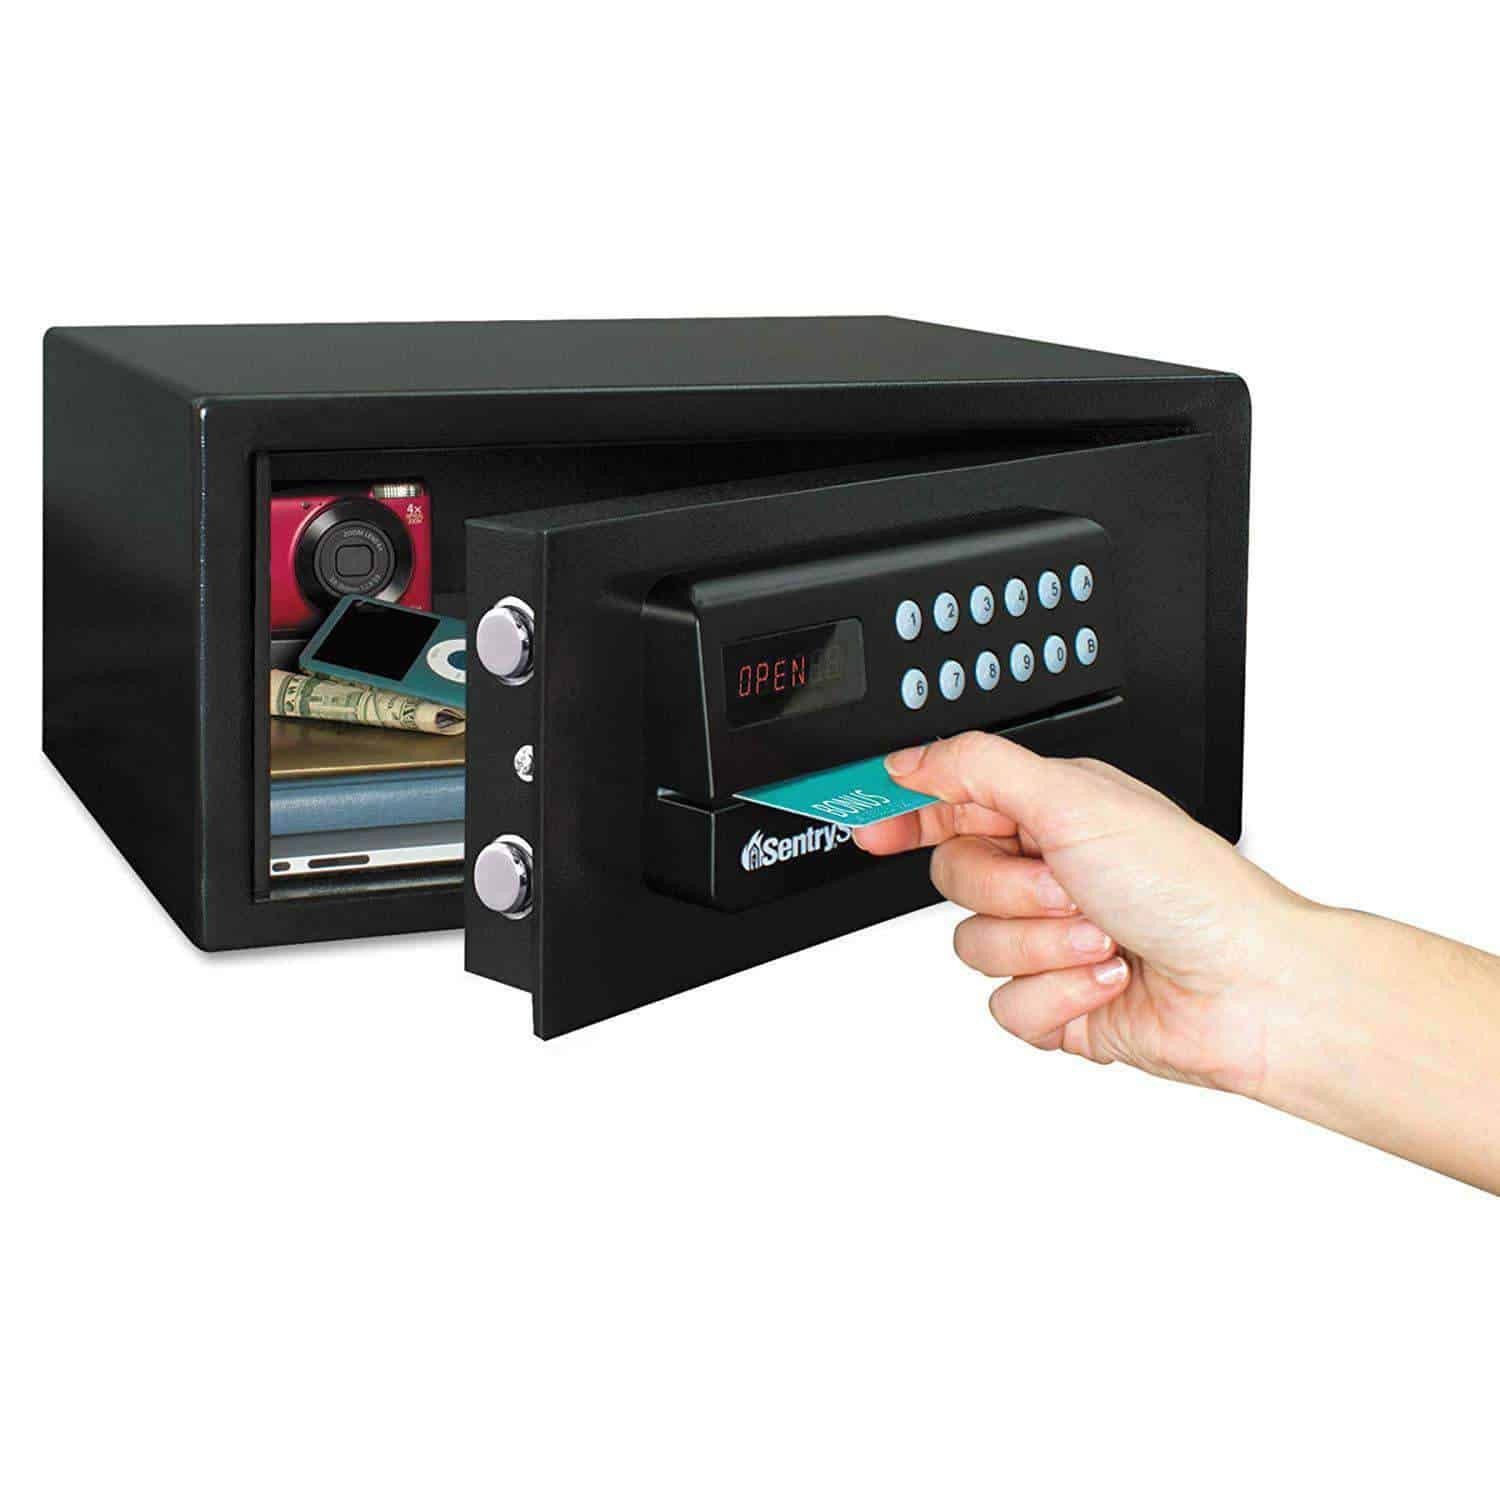 SentrySafe Personal Residential/Hotel Security Safe with Digital Lock & Card Swipe Entry - Senior.com Security Safes